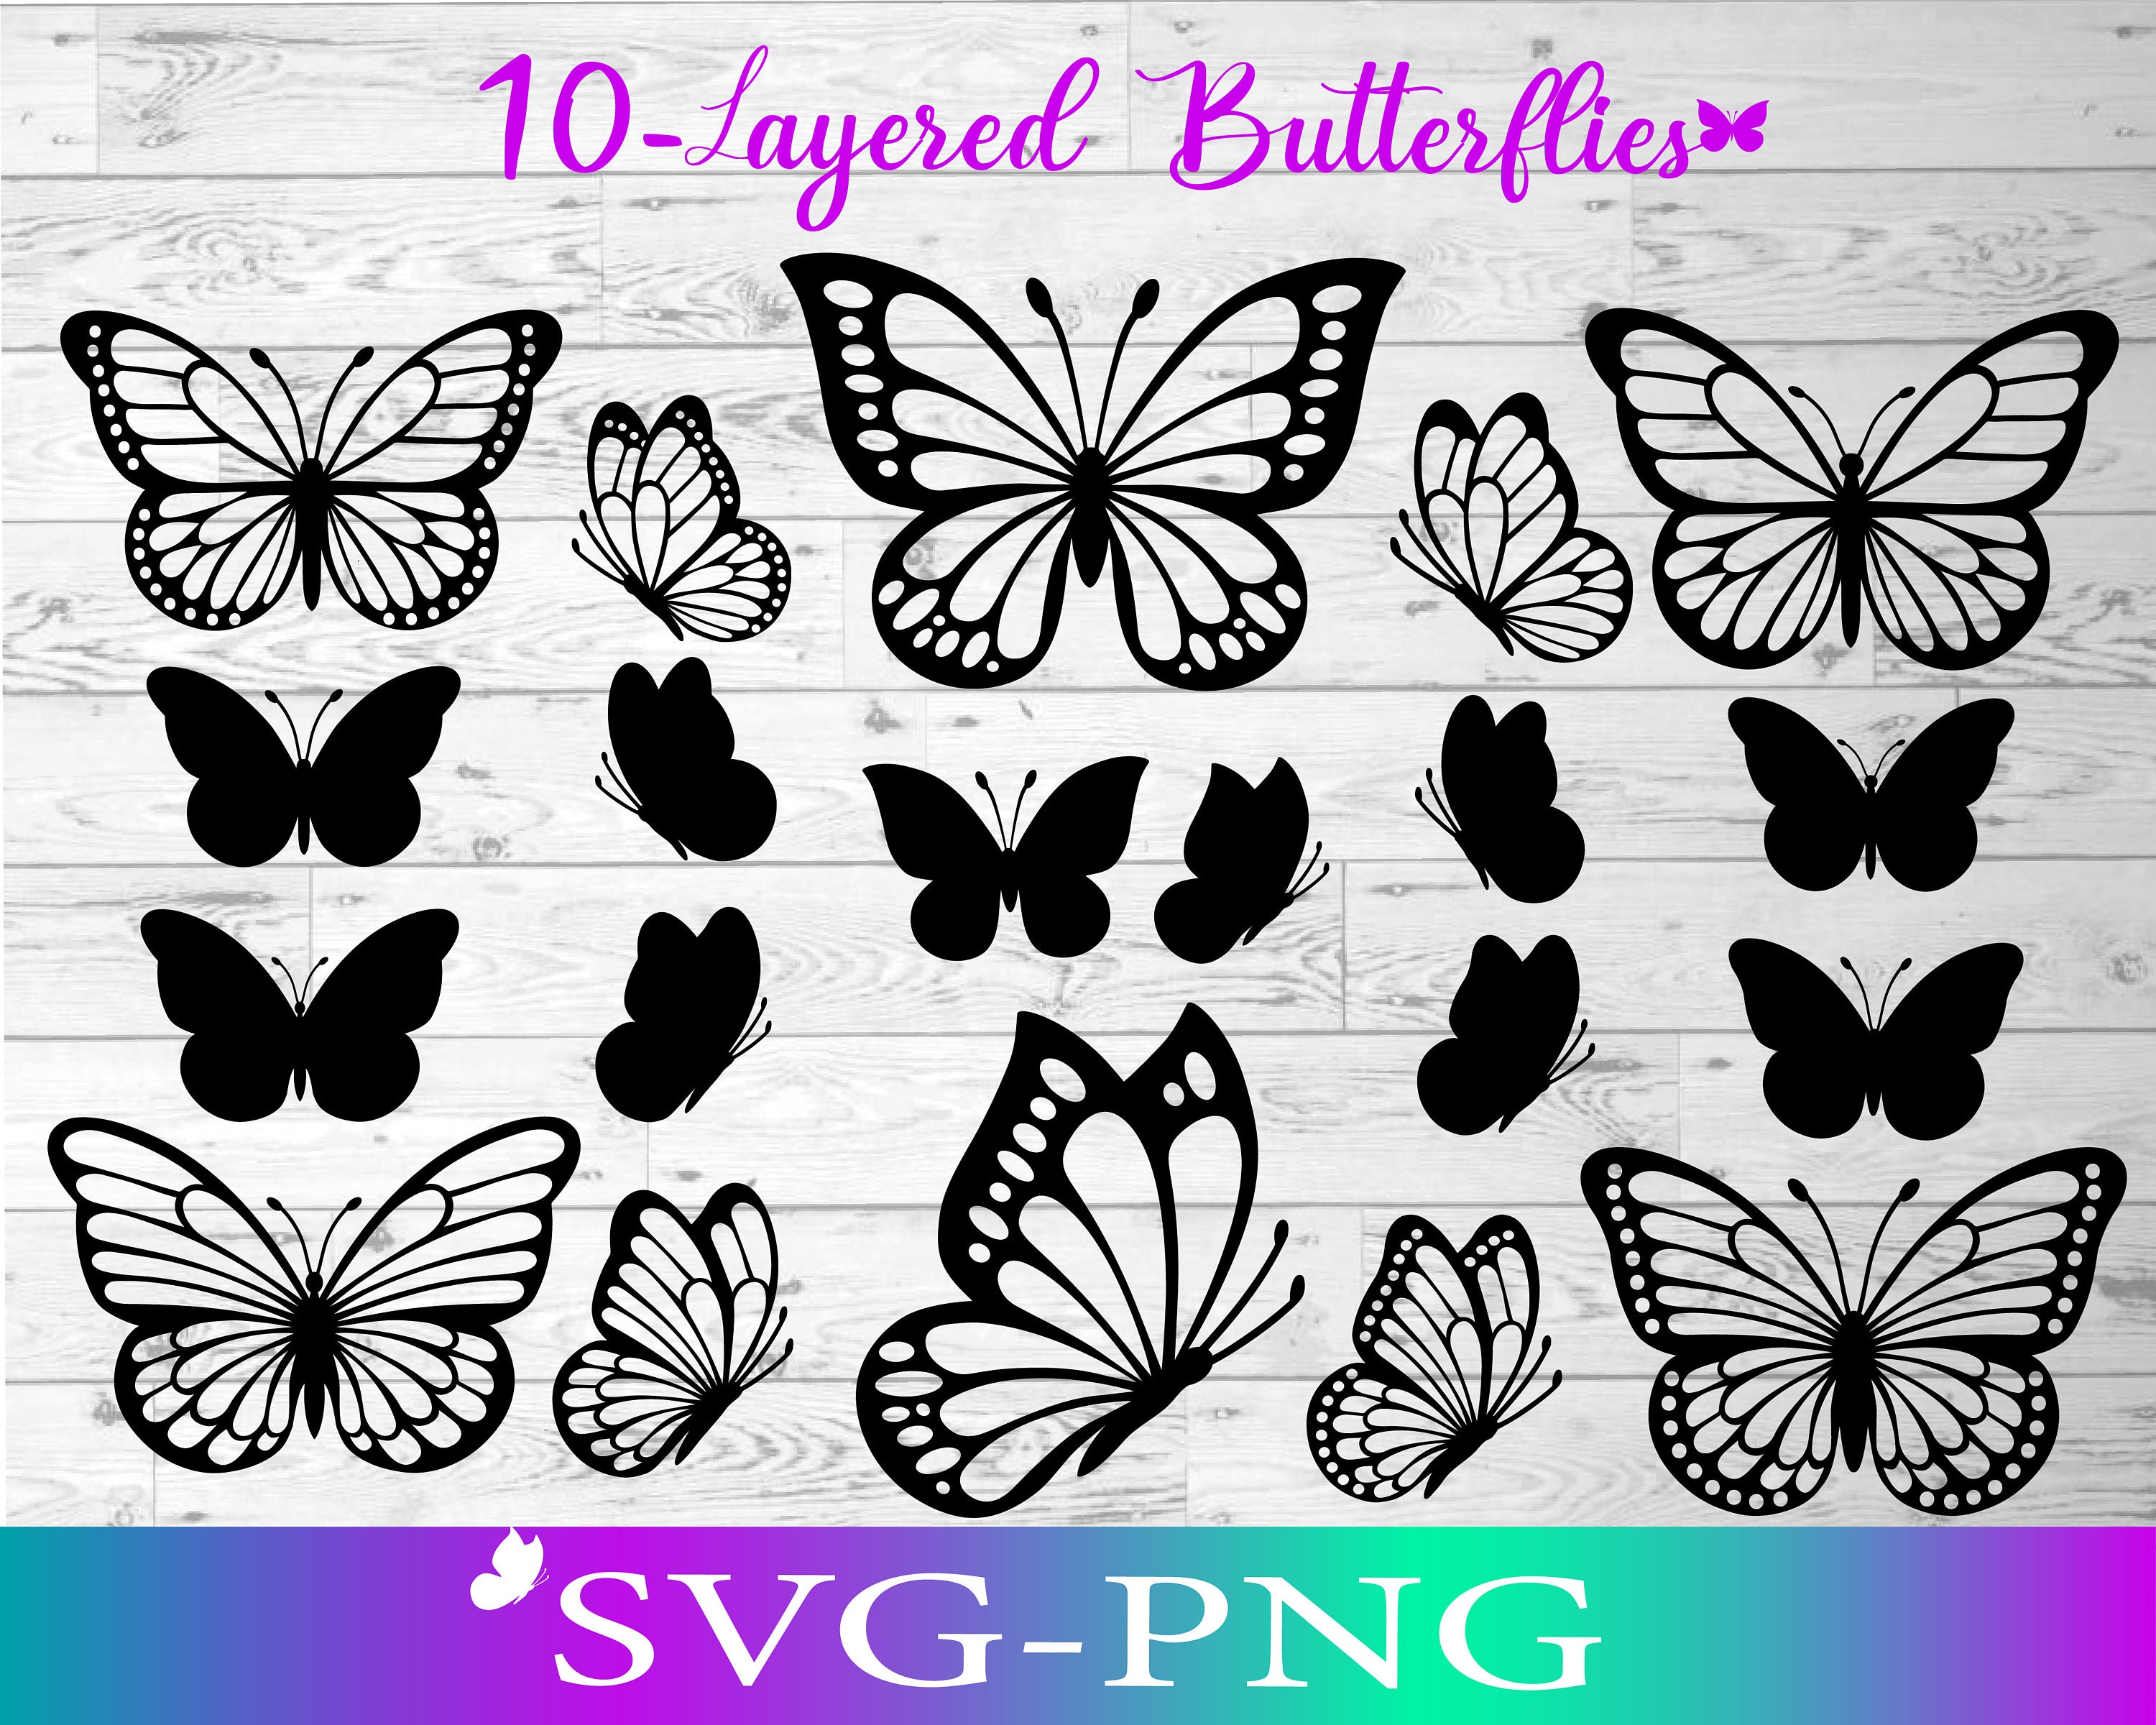 lllᐅ Lips butterfly SVG - sublimation Cricut silhouette cuttable file